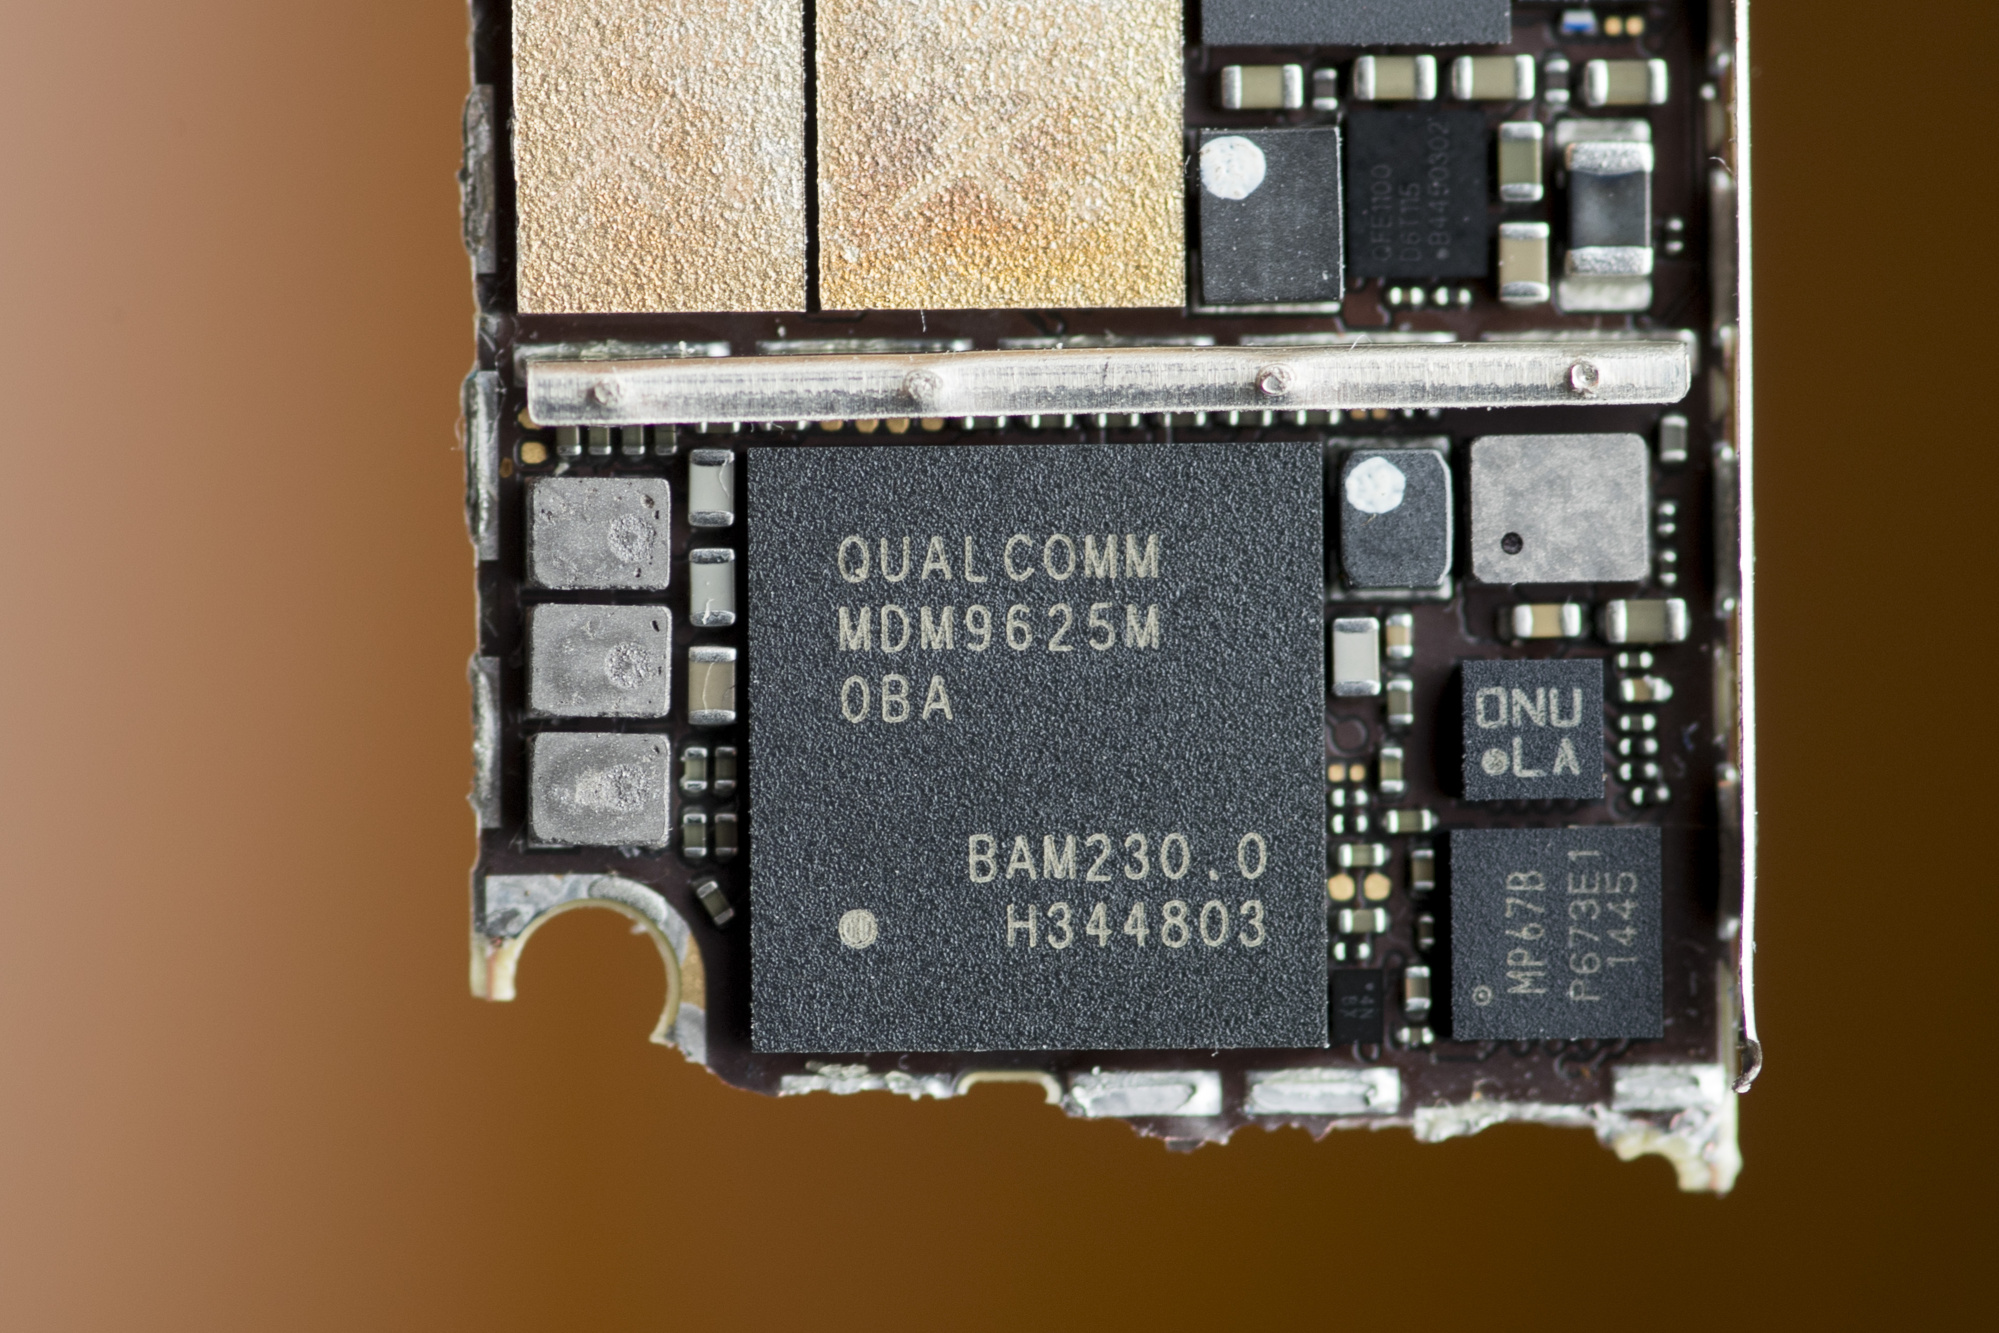 A Qualcomm chip from an Apple smartphone.